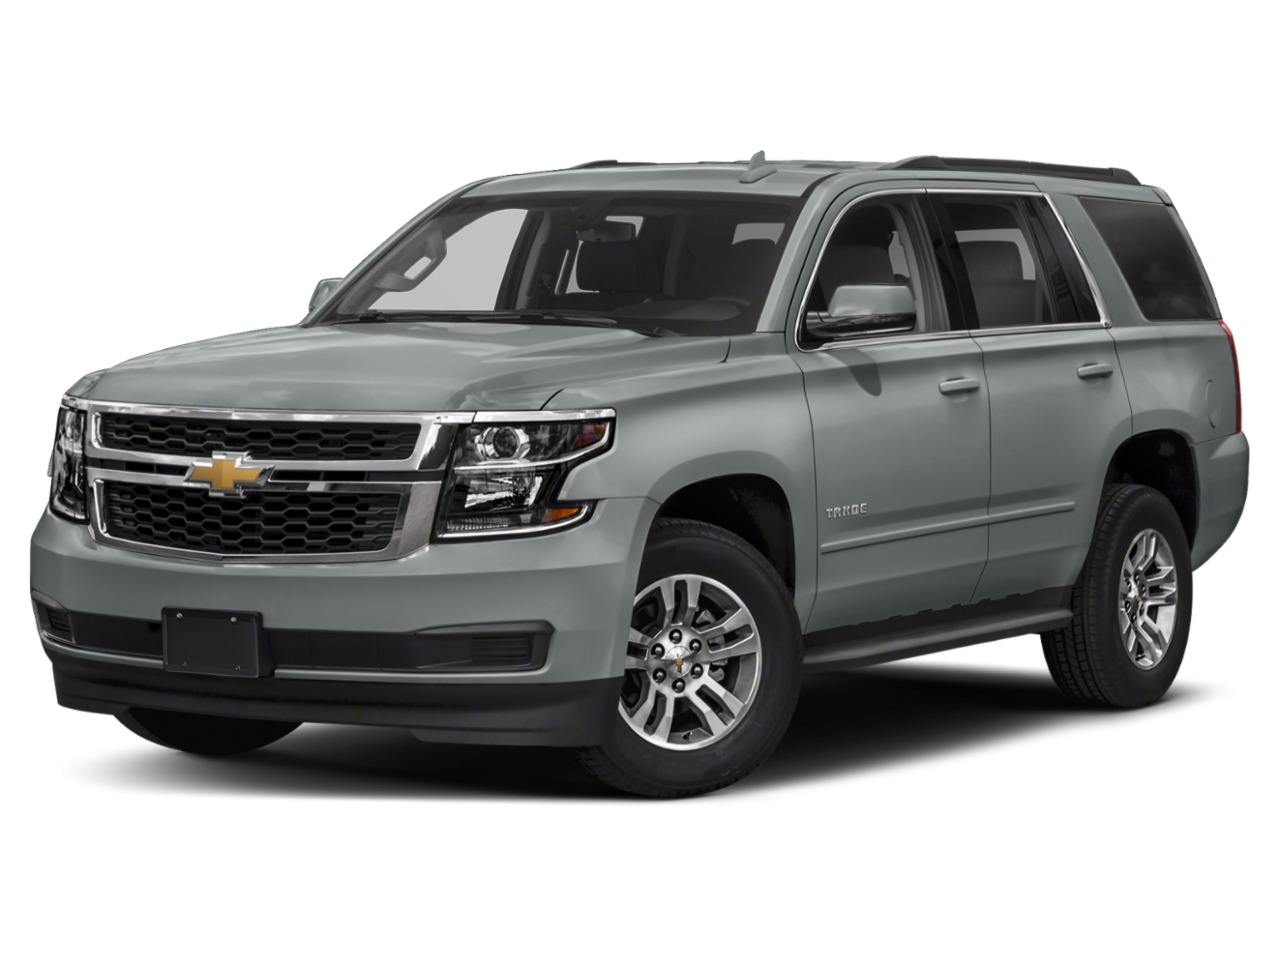 New Chevrolet Tahoe from your Fairview AB dealership, Adventure